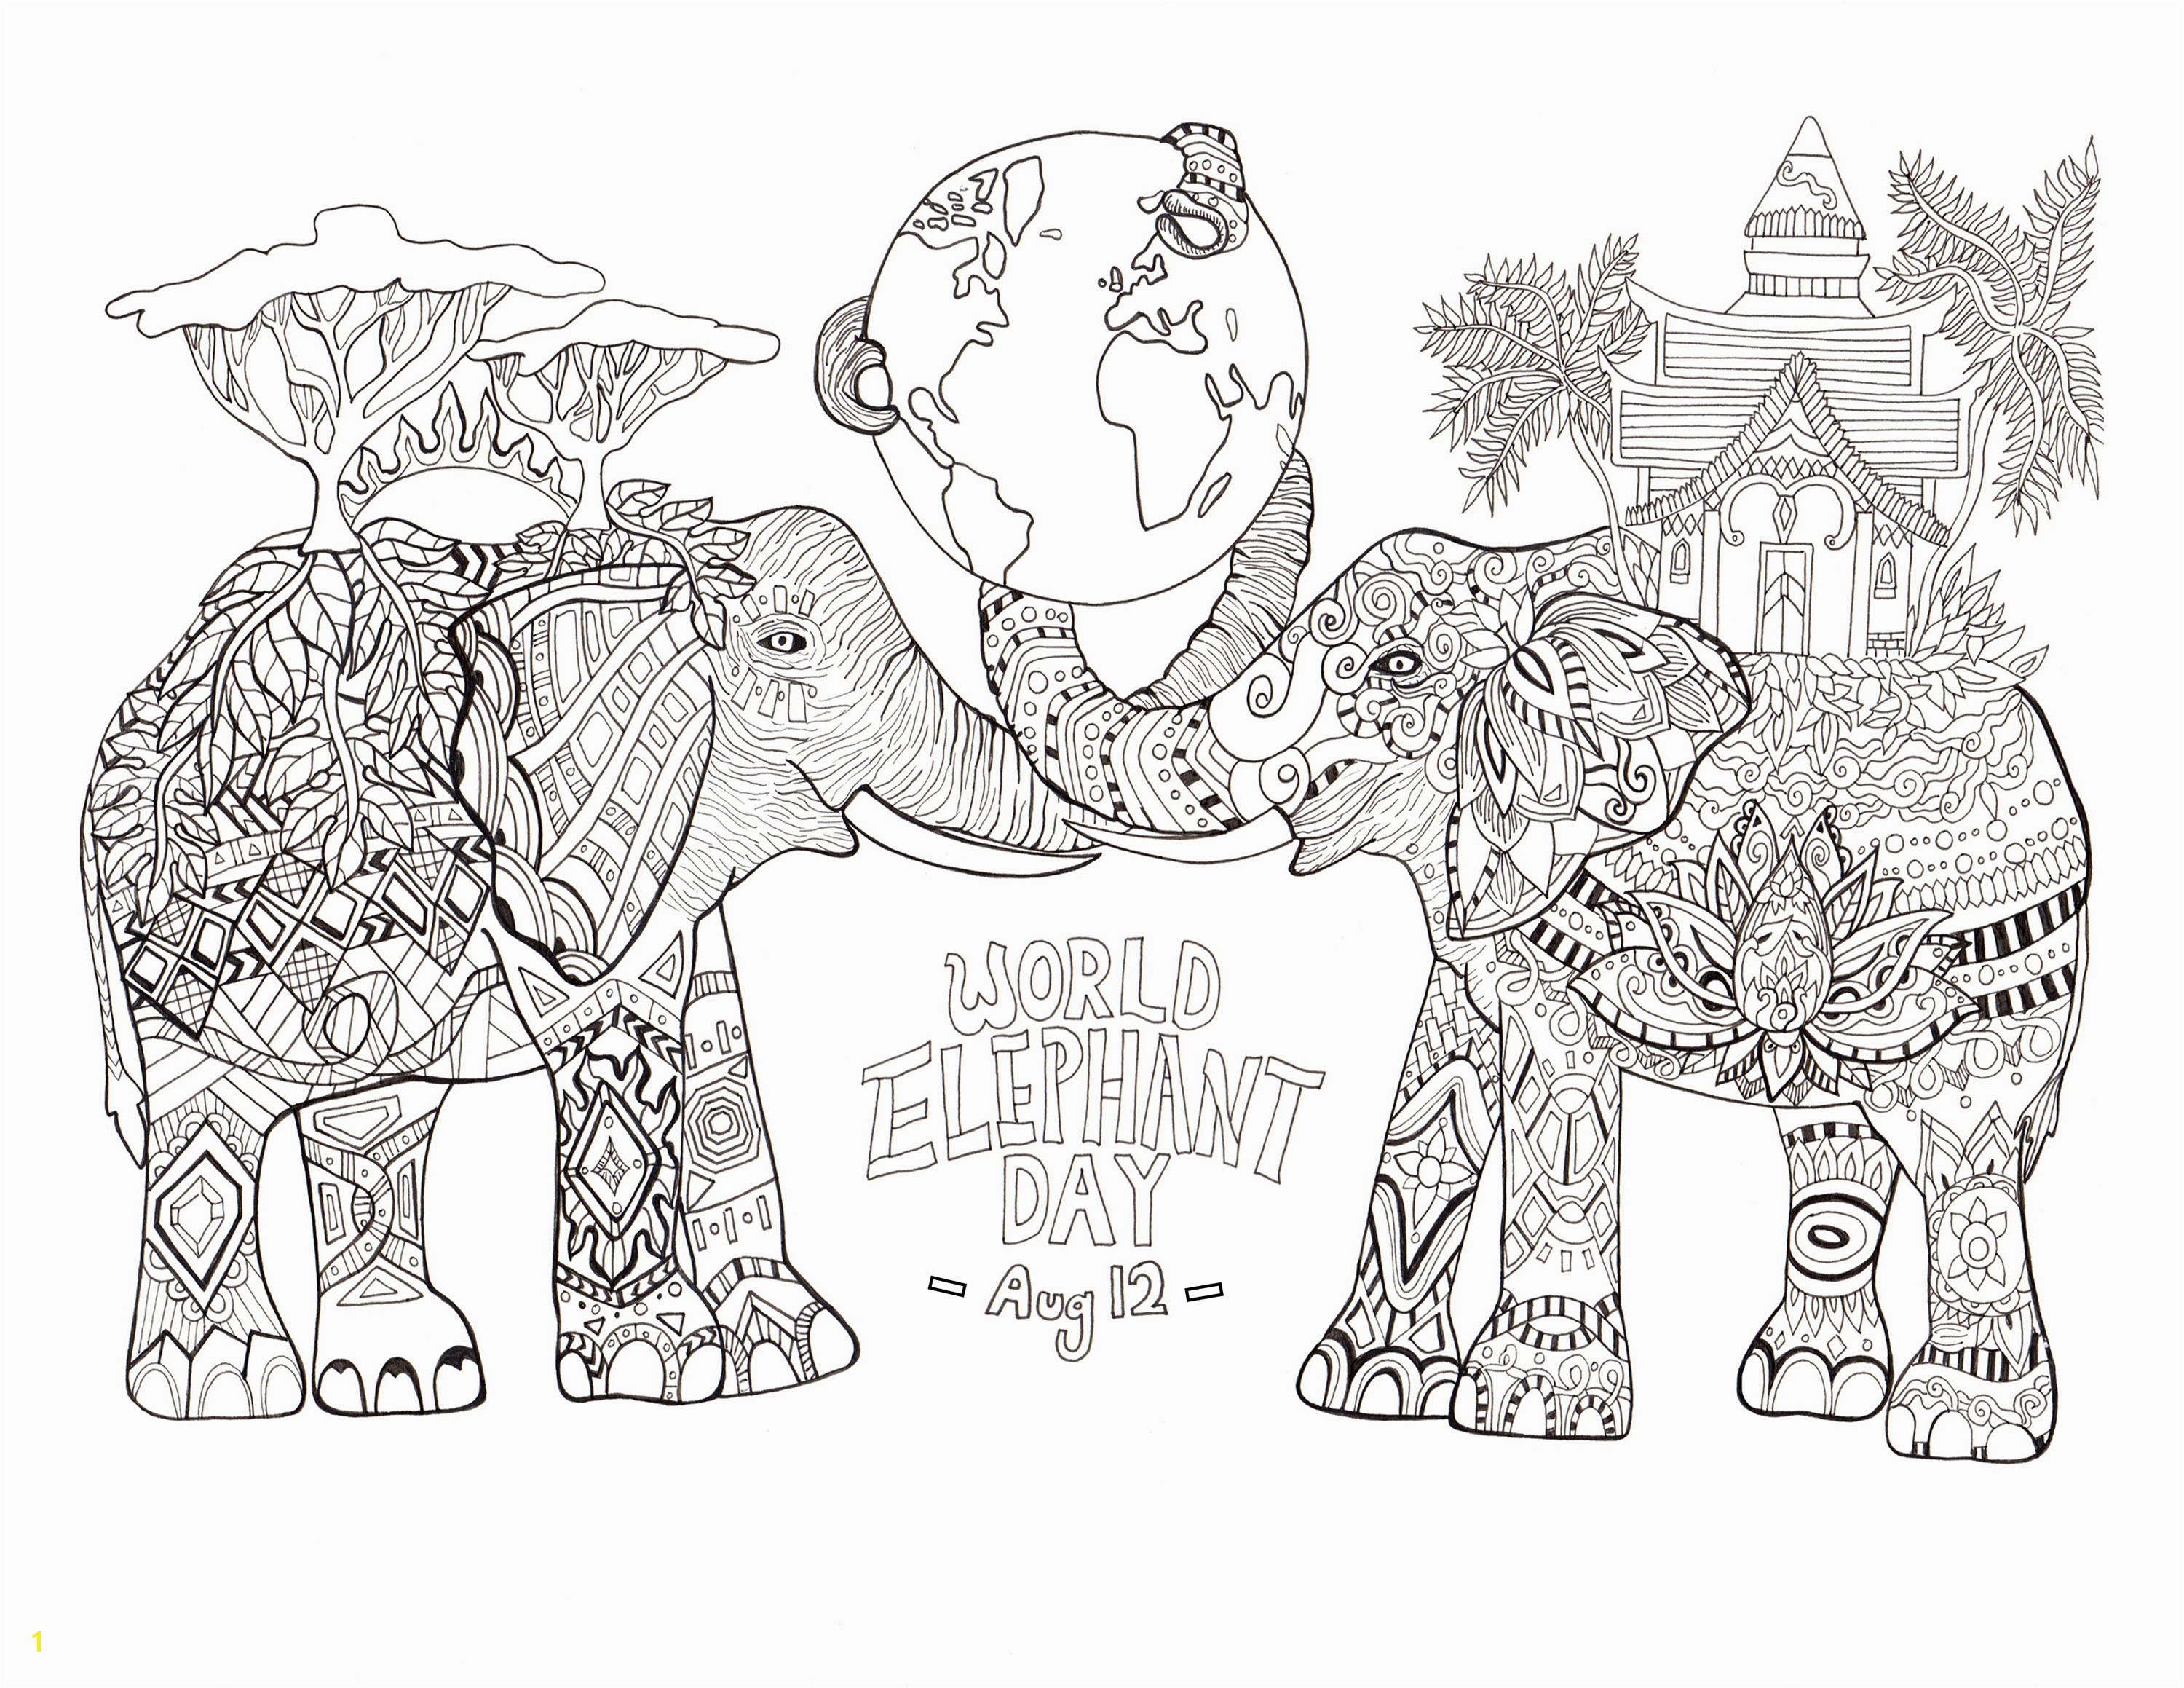 Coloring page drawn by Rylee Postulo for the World Elephant Day Aug 12